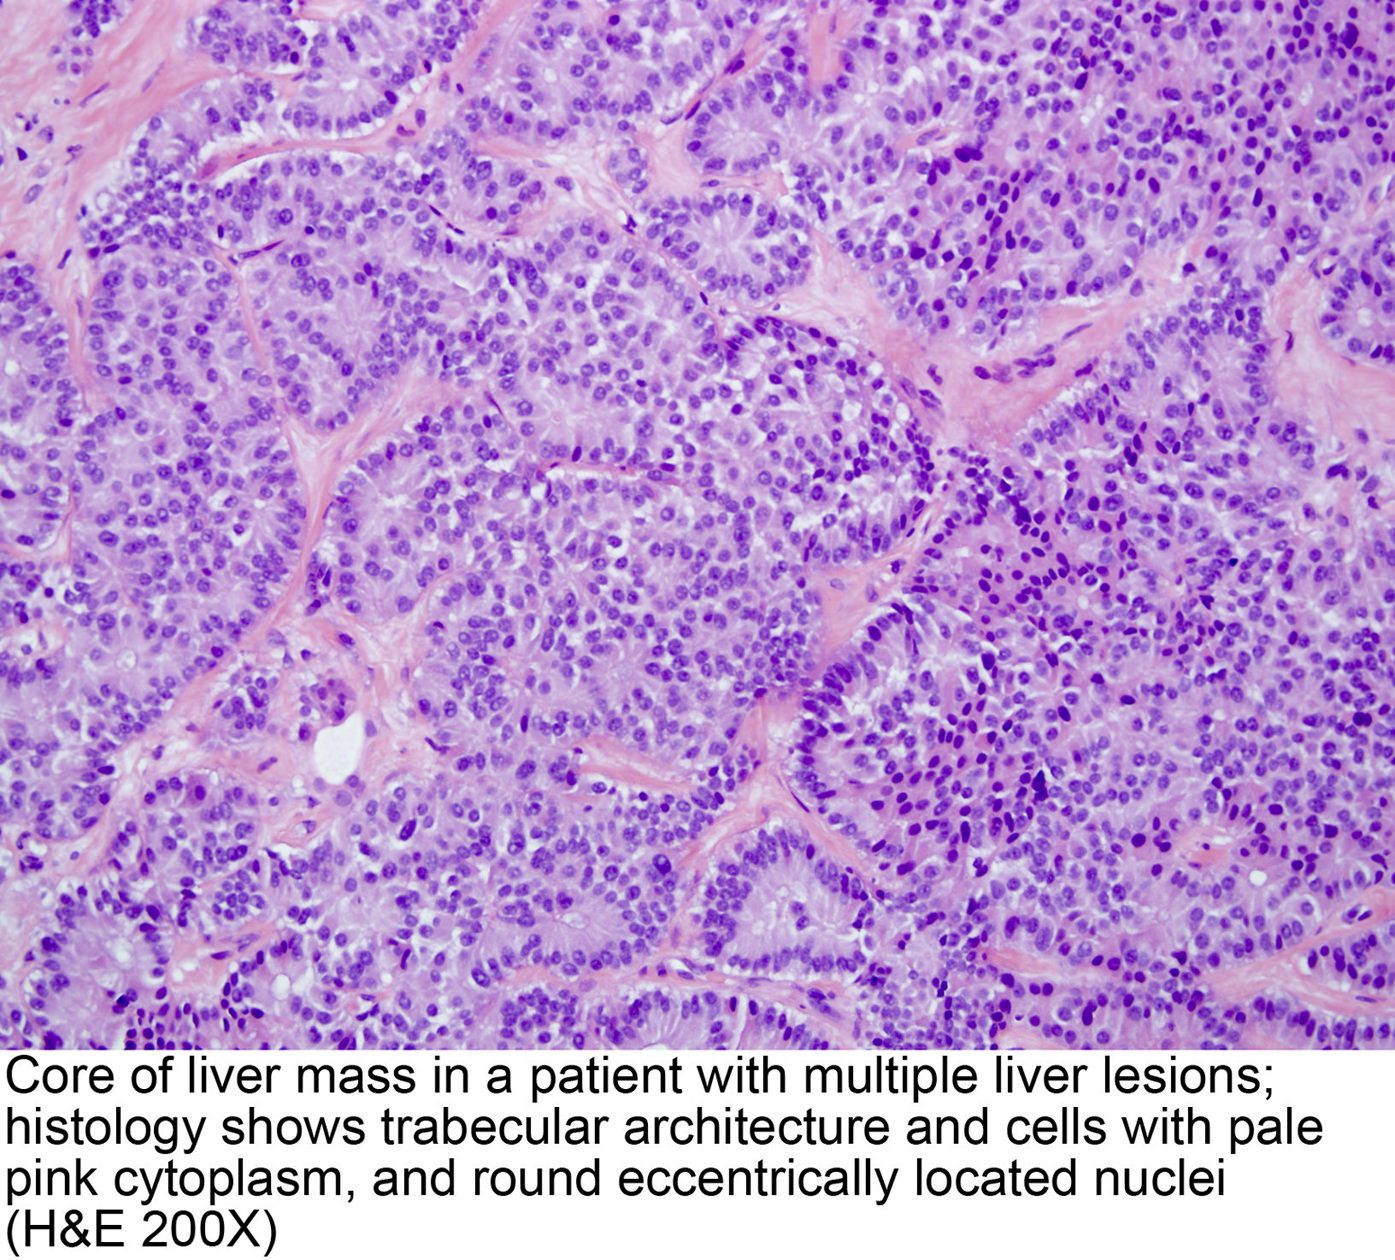 adenocarcinoma with neuroendocrine differentiation pathology outlines)